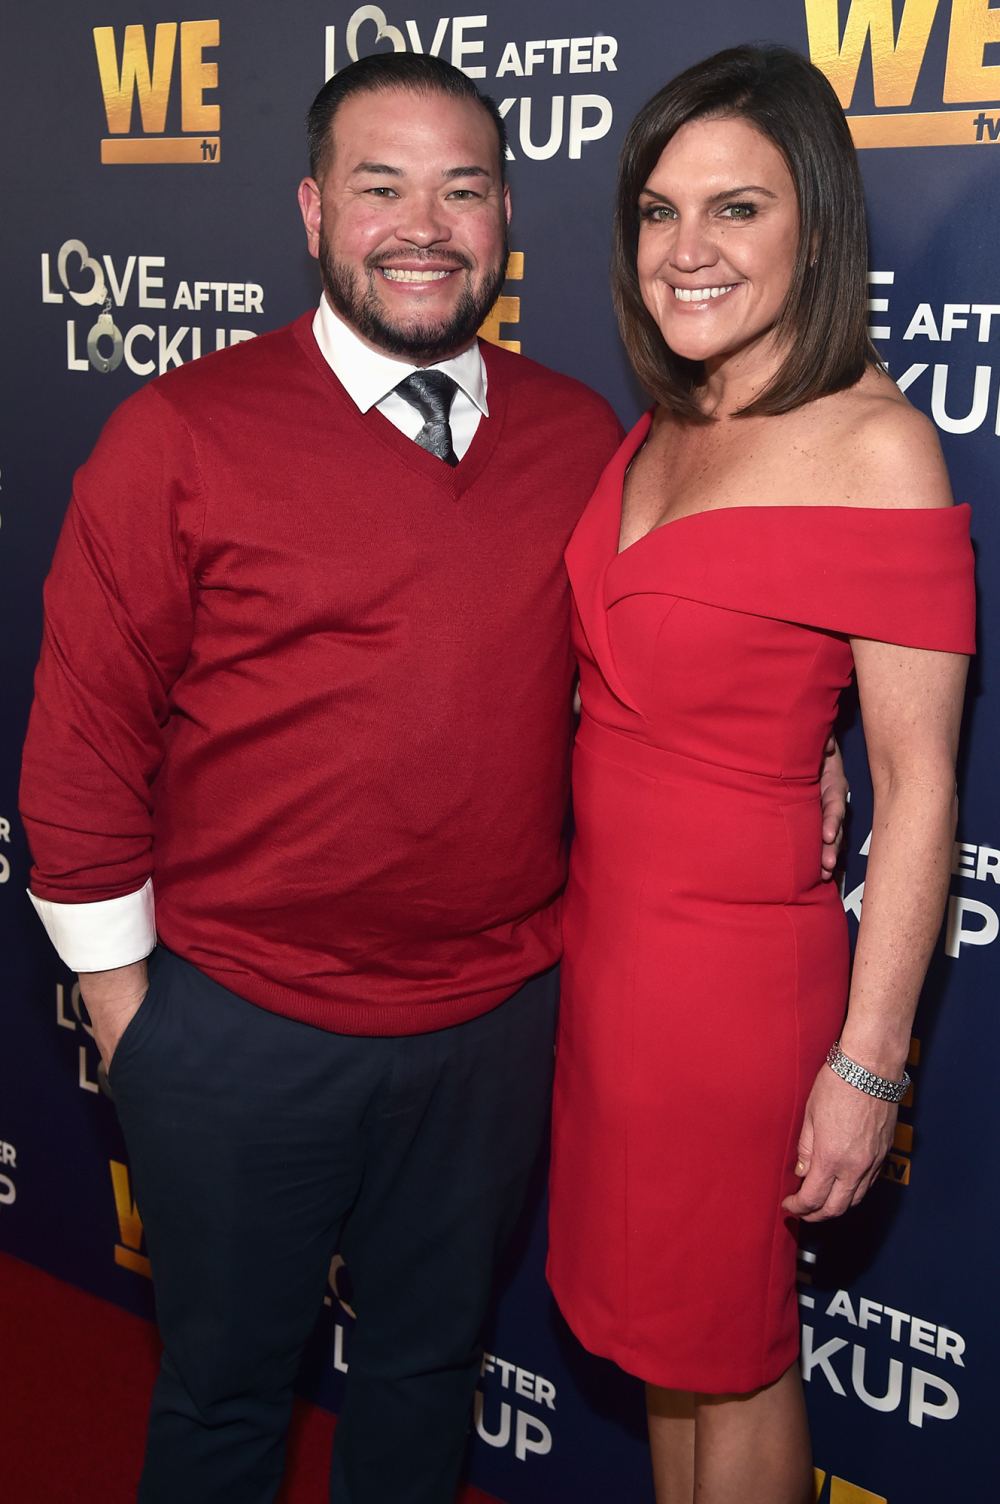 Jon Gosselin and Girlfriend of 4 Years Colleen Conrad Have ‘Talked About’ Marriage